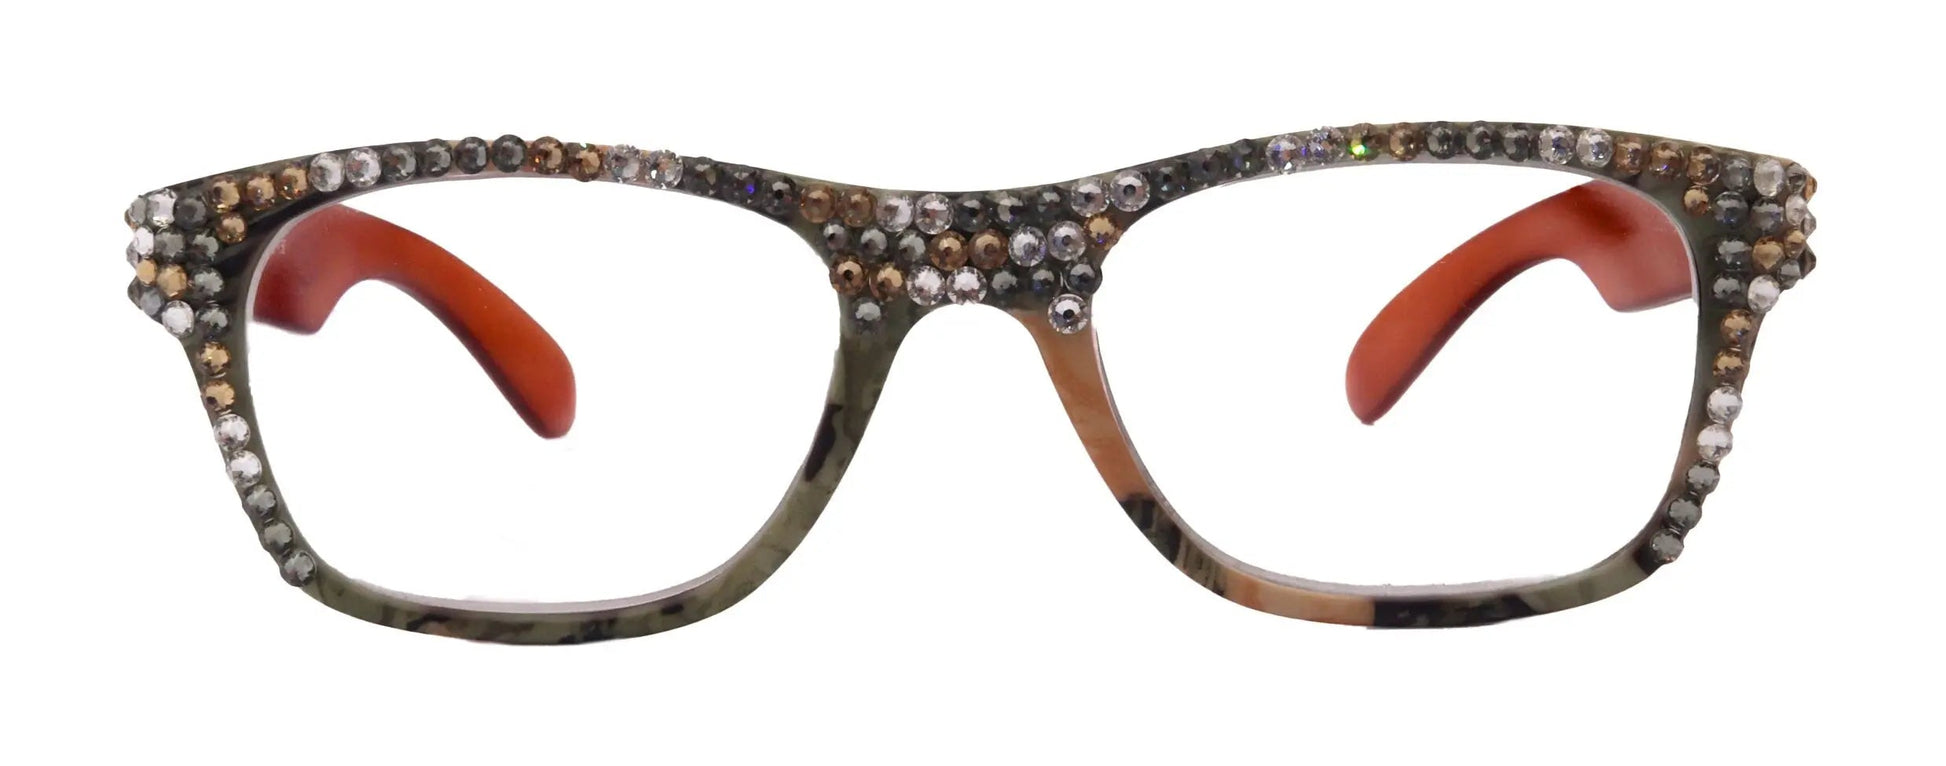 The Forester, (Bling) Reading Glasses For Women W (Light Colorado, Cooper)Genuine European Crystals. +1.25..+3  Camouflage, NY Fifth Avenue